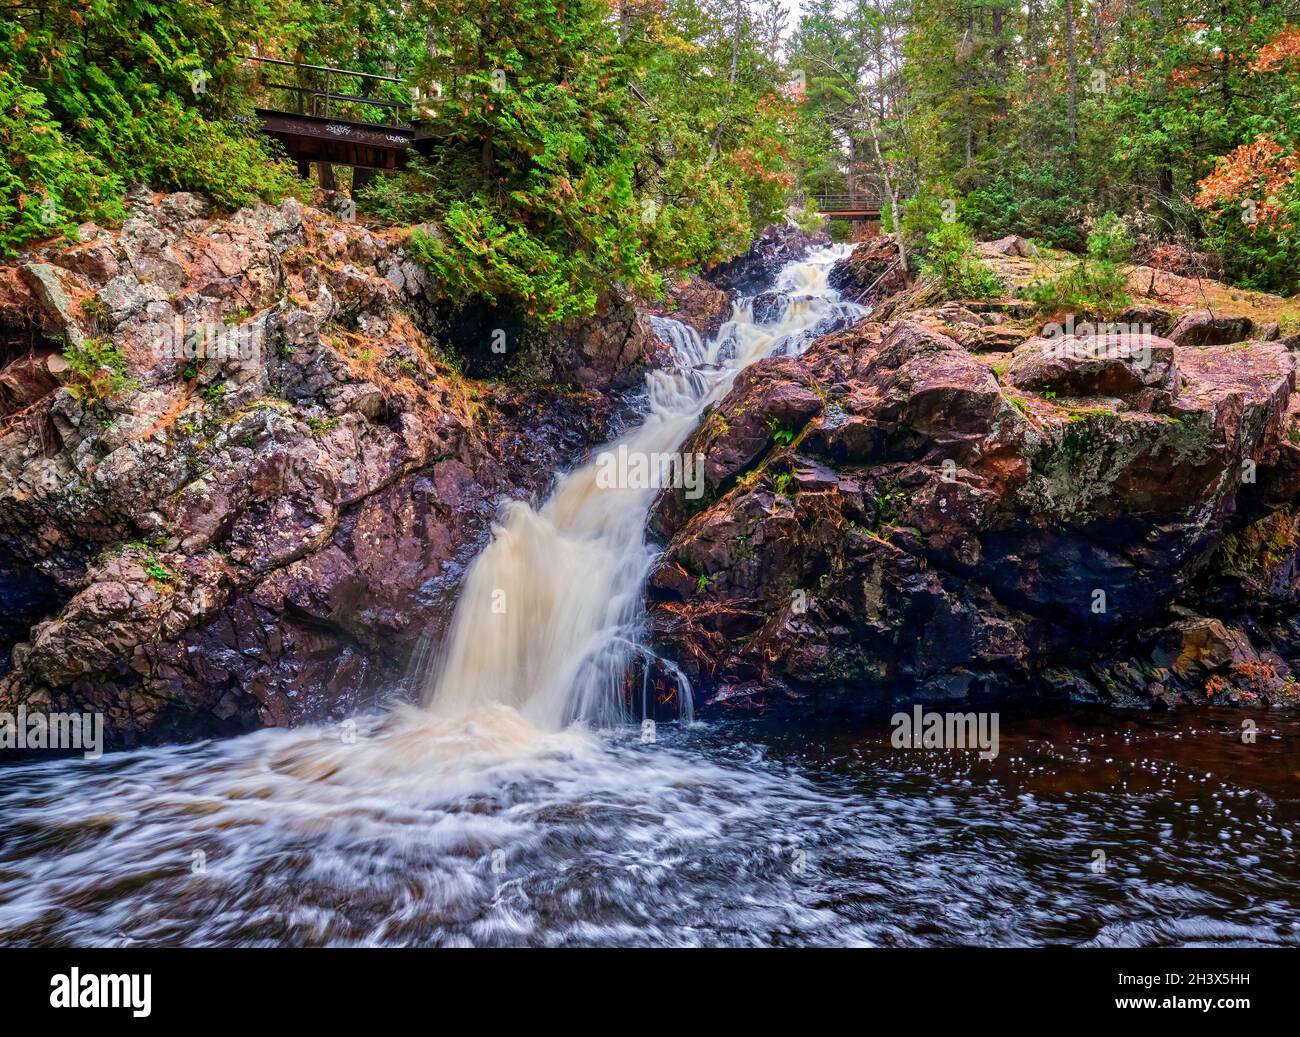 Crystal Falls is located within Hiawatha Highlands Park also known as Kinsman Park near the city of Sault Ste Marie Ontario Canada. Stock Photo